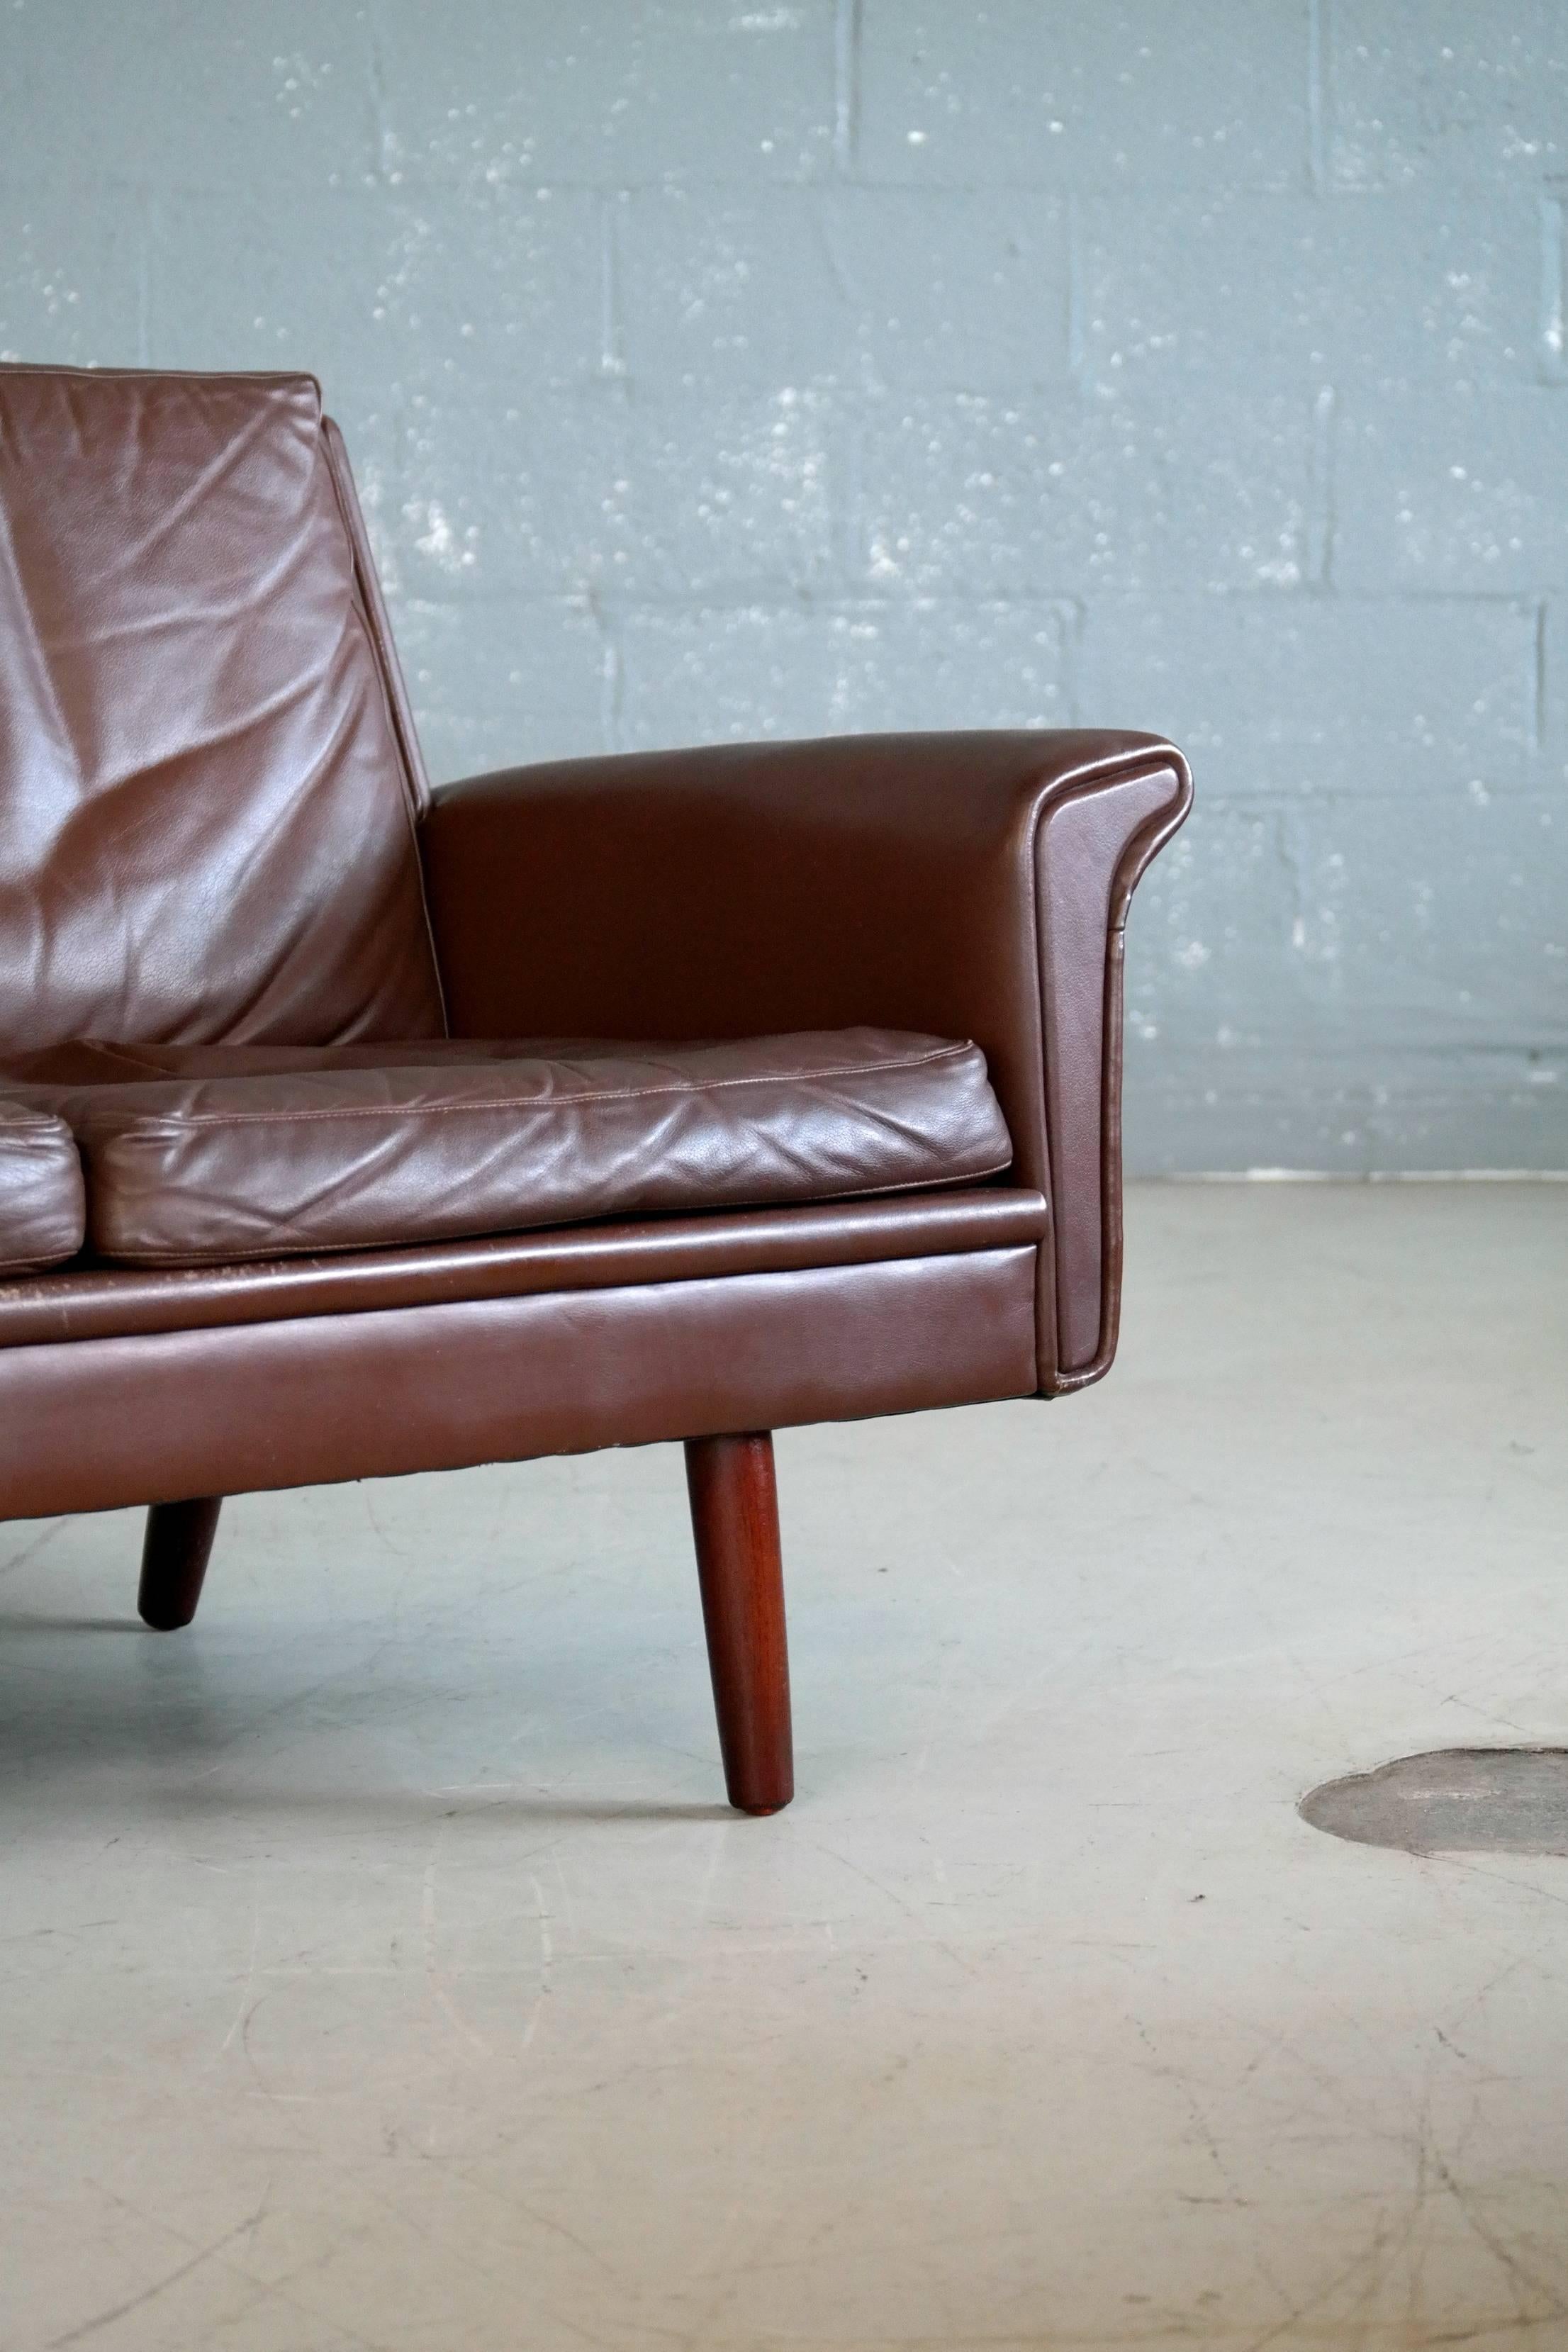 Mid-Century Modern Classic Danish Midcentury Sofa in Chestnut Colored Leather by Georg Thams